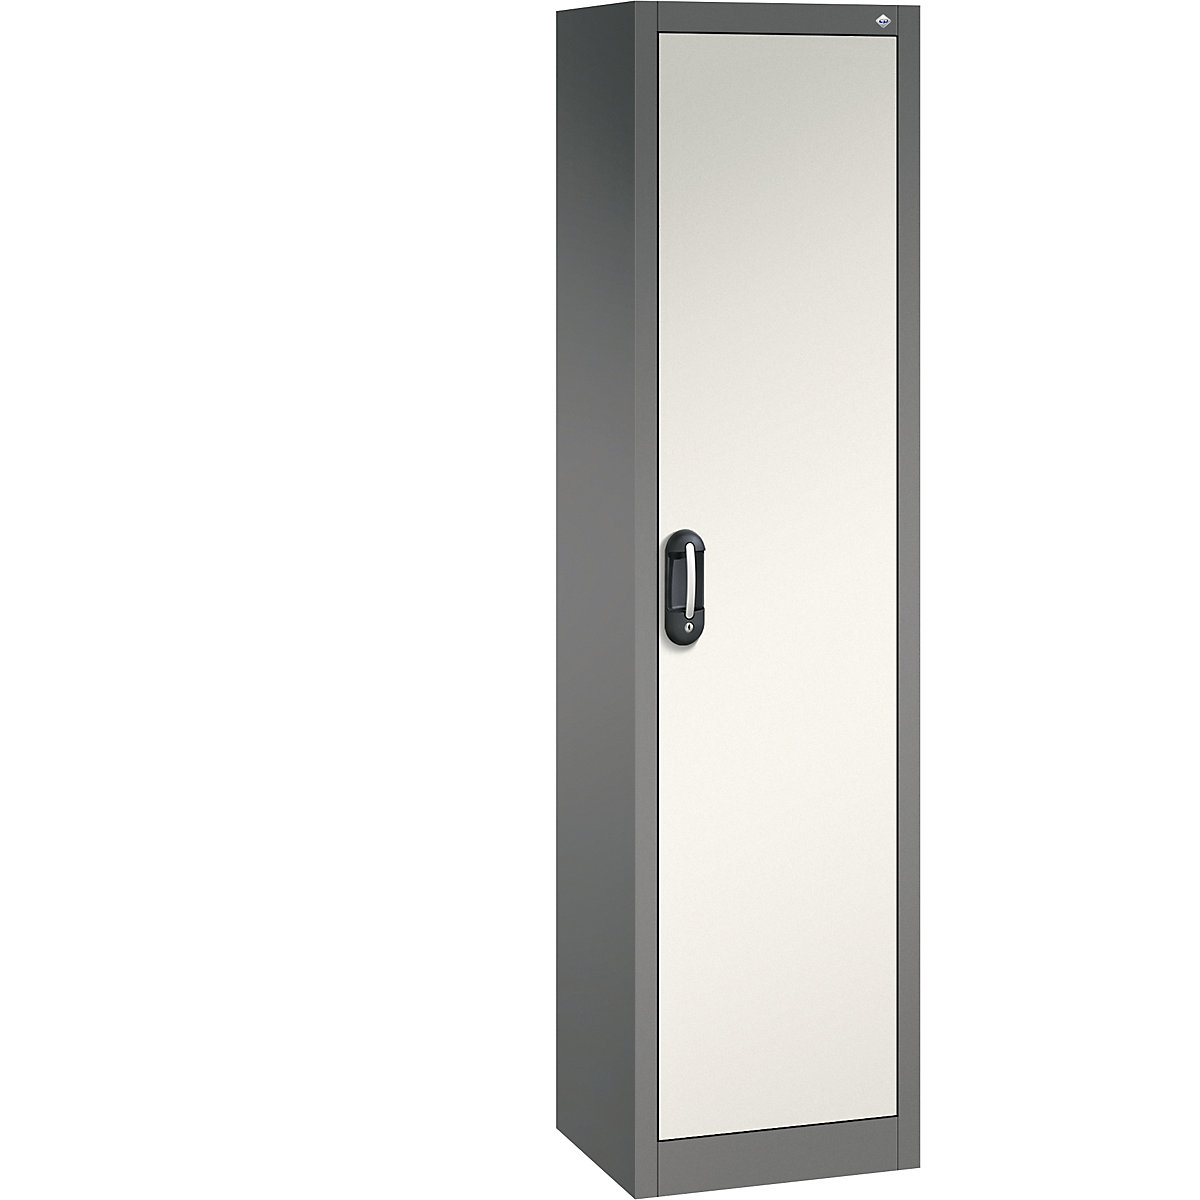 ACURADO universal cupboard – C+P, WxD 500 x 400 mm, volcanic grey / oyster white-17